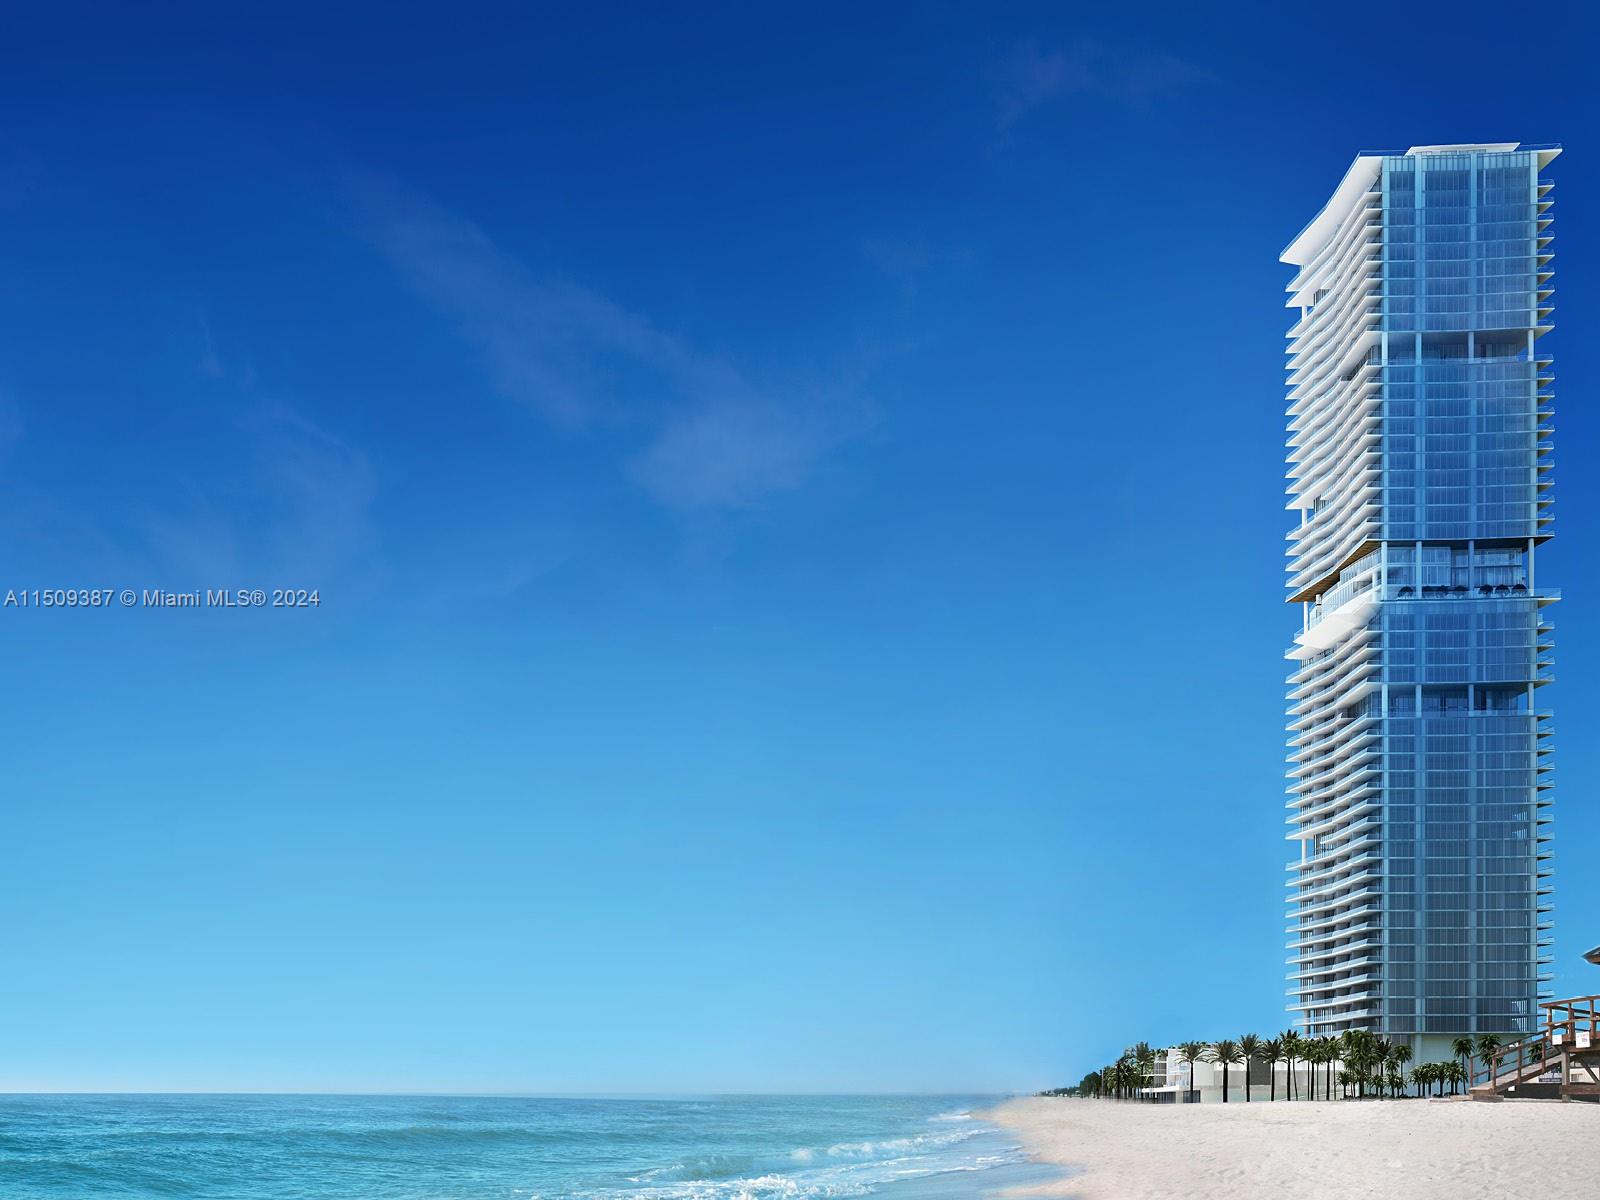 18501 Collins Ave 5204 + Beach Cabana, Sunny Isles Beach, FL 33160, 6 Bedrooms Bedrooms, ,9 BathroomsBathrooms,Residential,For Sale,Collins Ave,A11509387